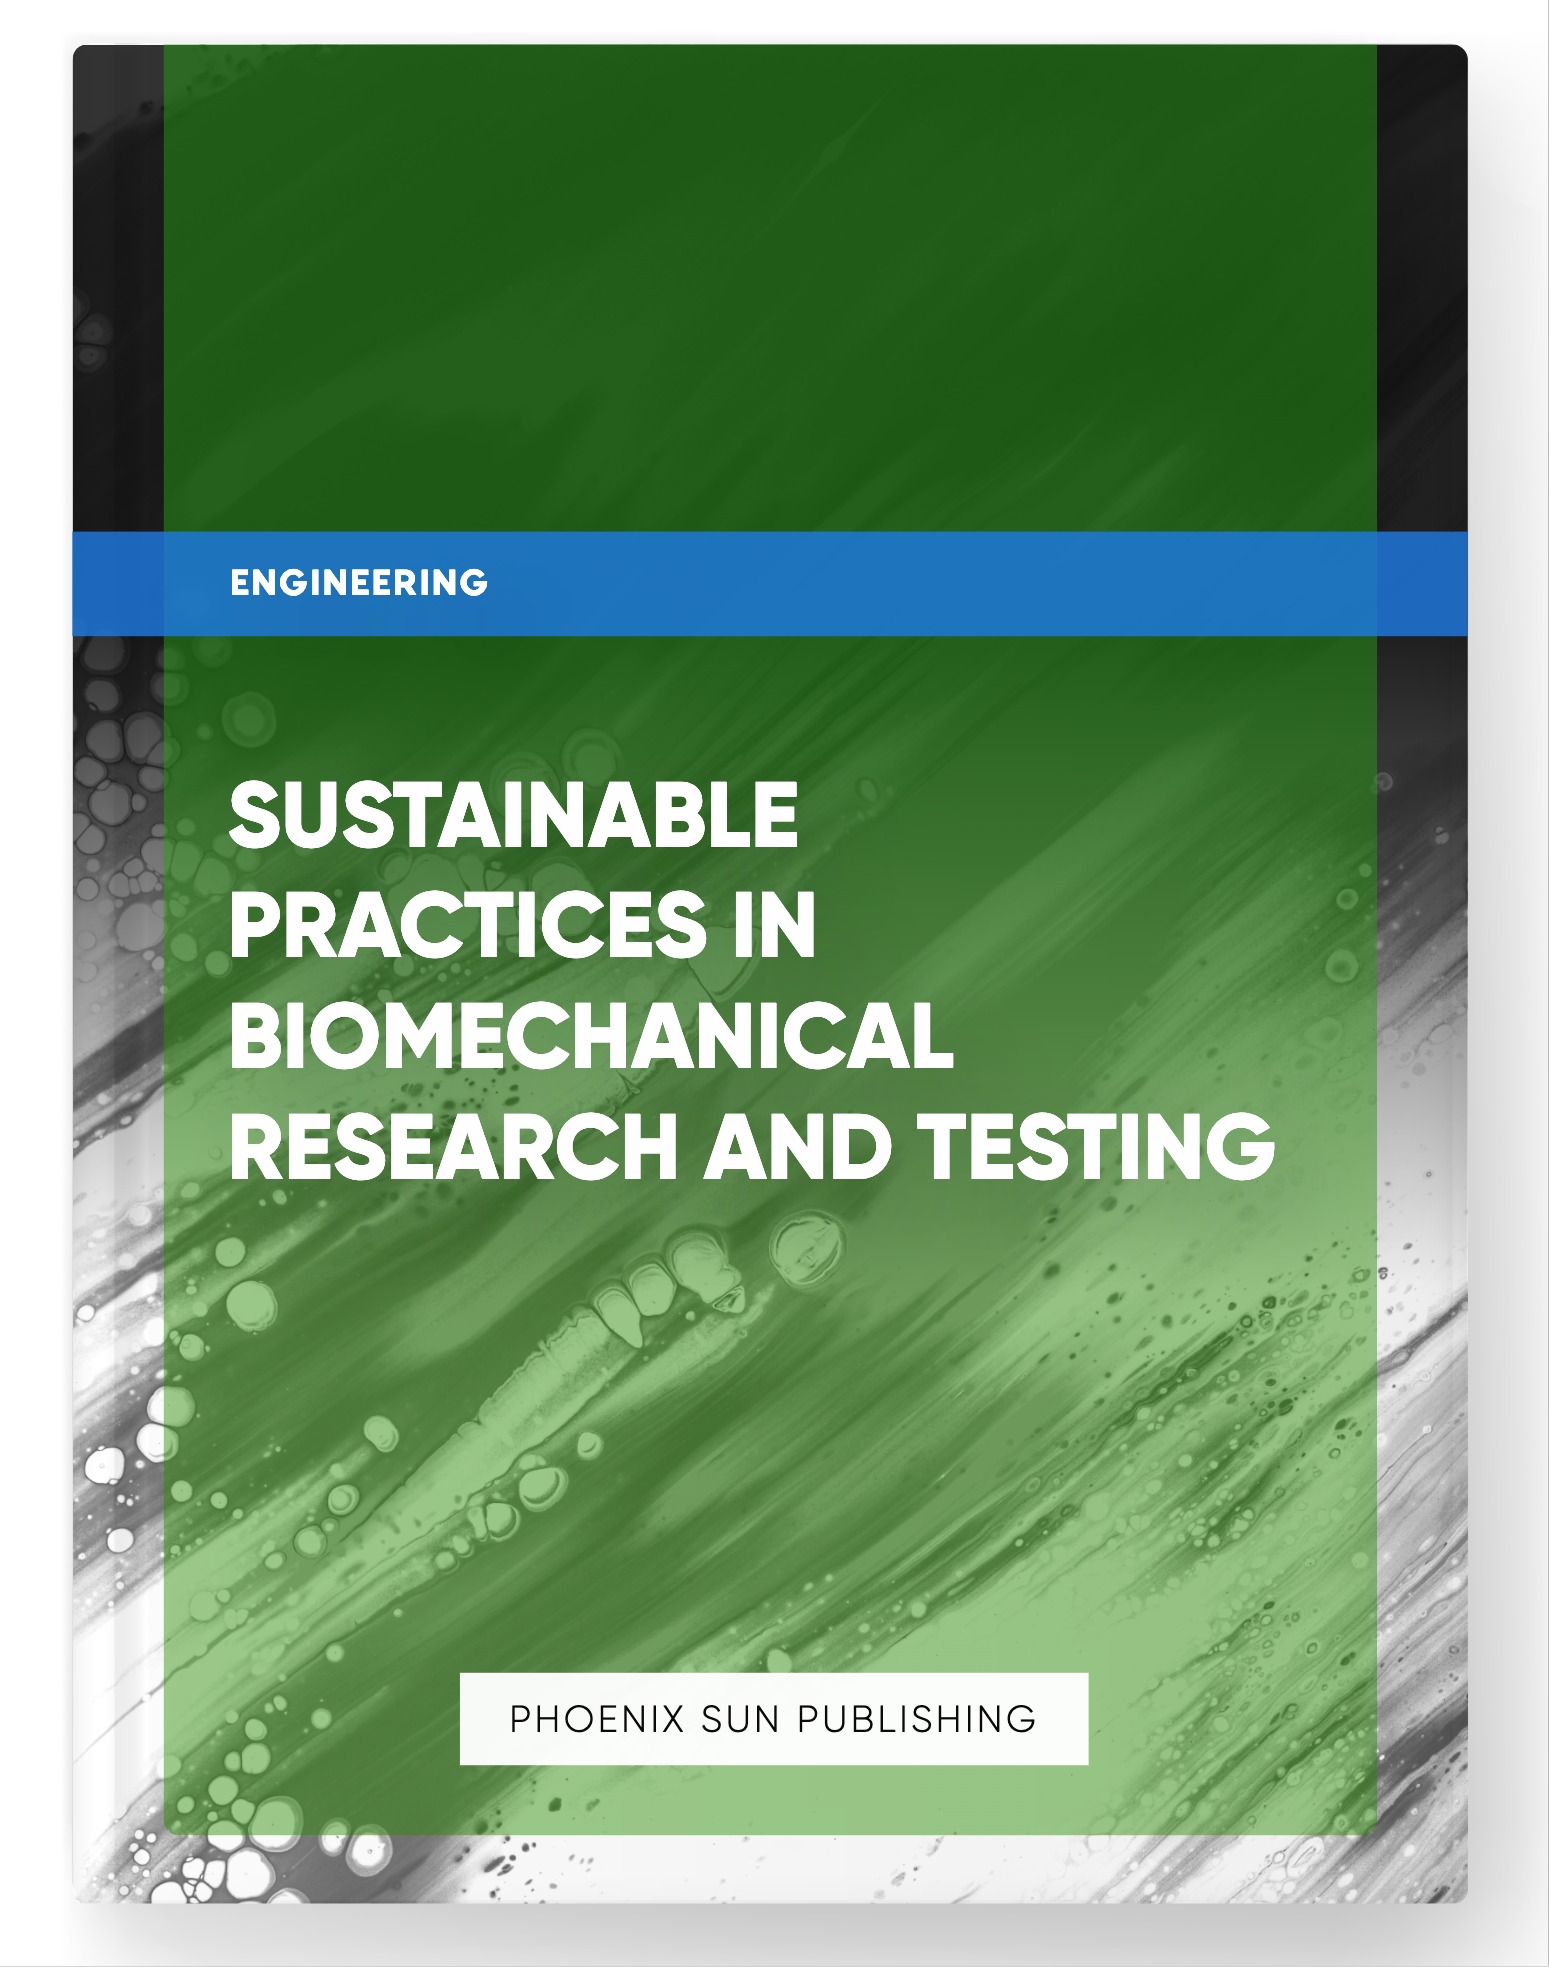 Sustainable Practices in Biomechanical Research and Testing